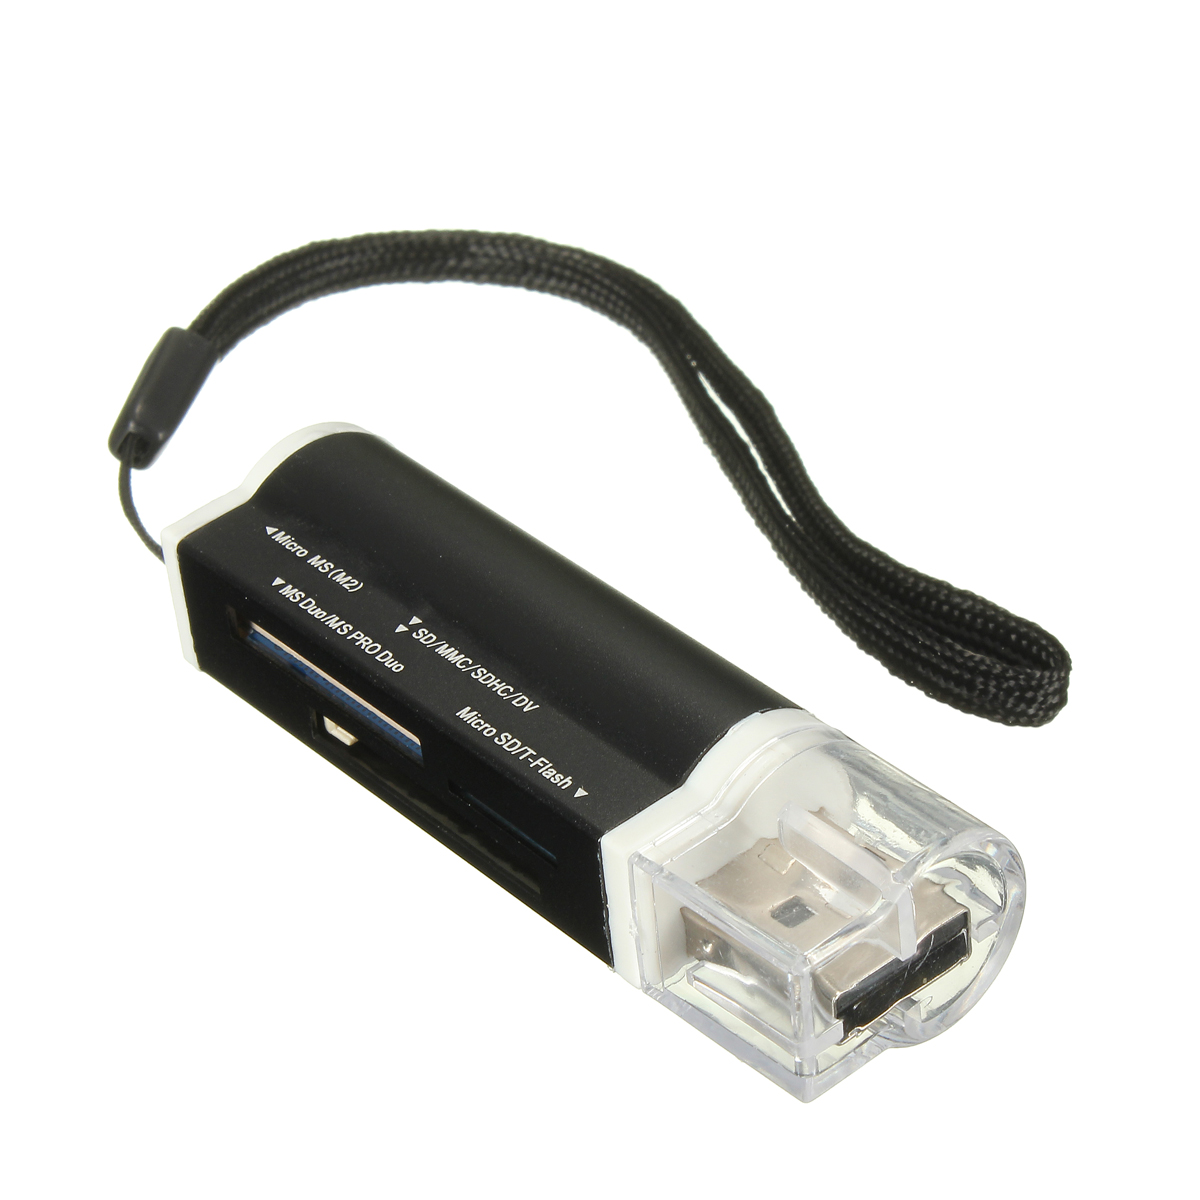 Meco-SY-662-USB20-Multifunctional-Card-Reader-TF--SD--SDHC--MMC-Memory-Card-Adapter-With-Sling-1884377-8